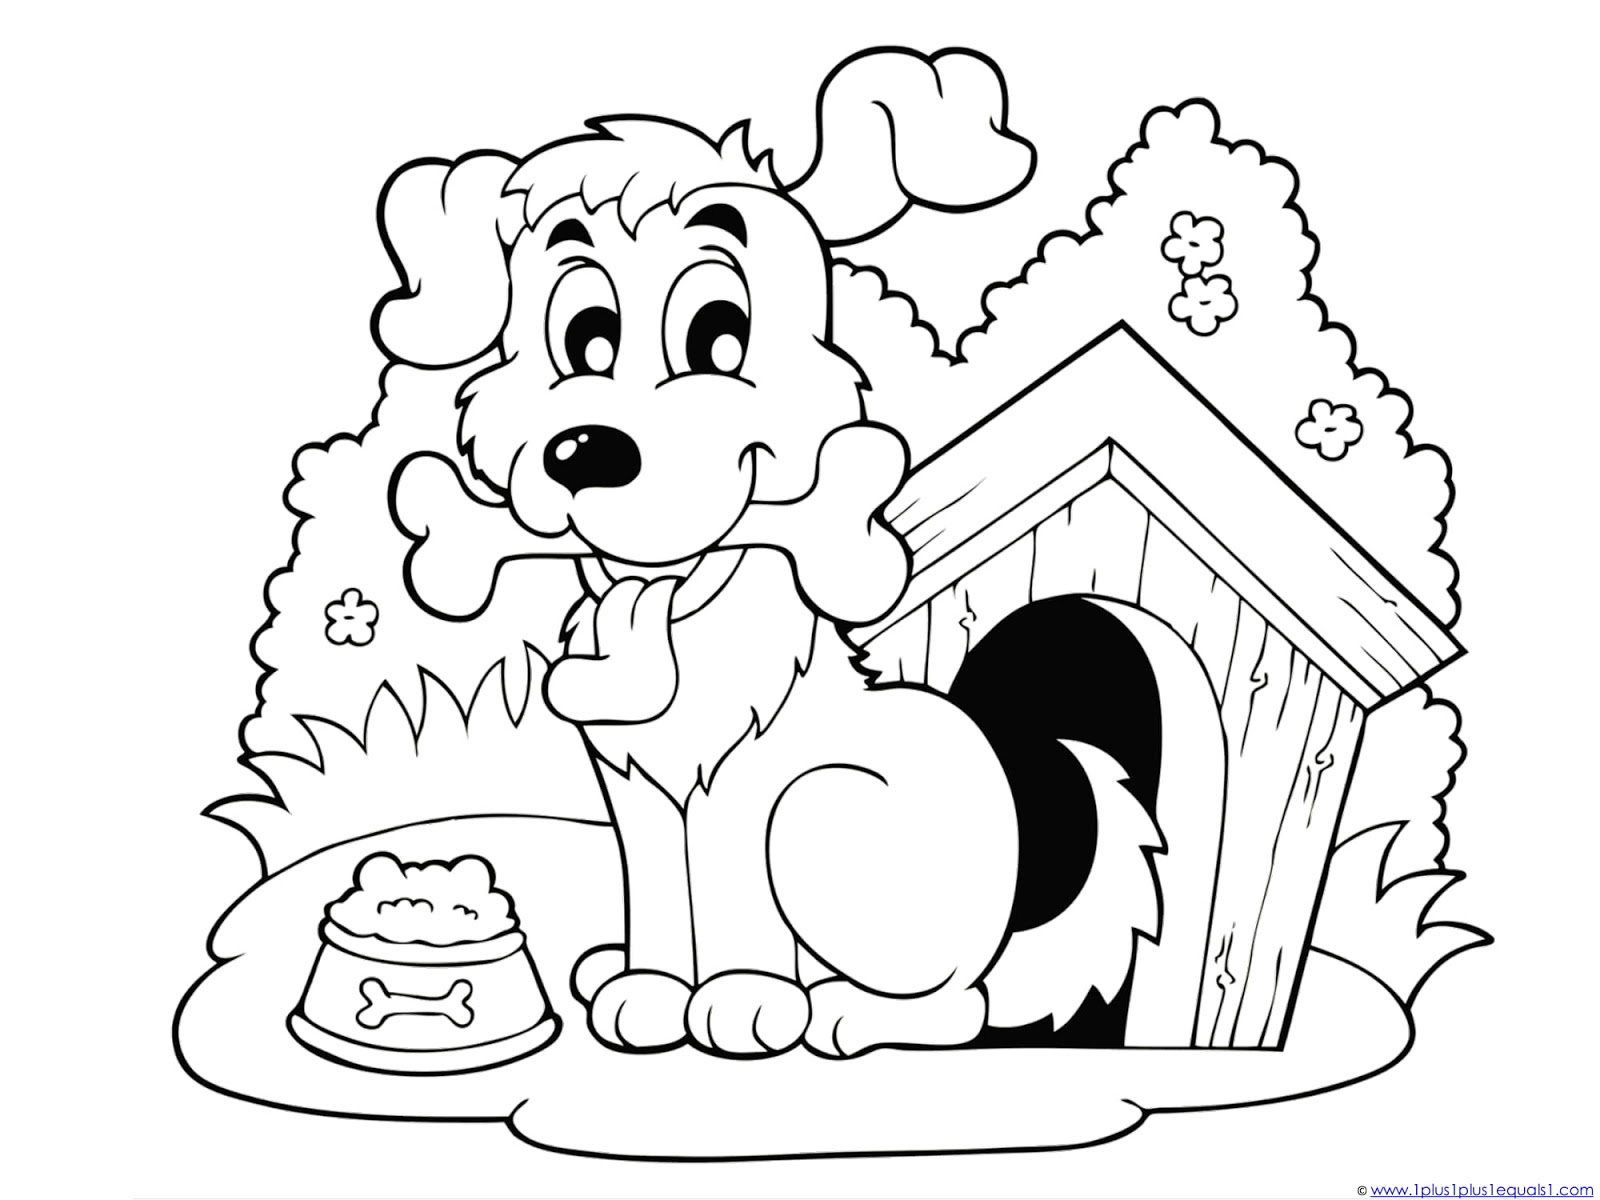 coloring-pages-dog-and-cats-for-preschool-malvorlage